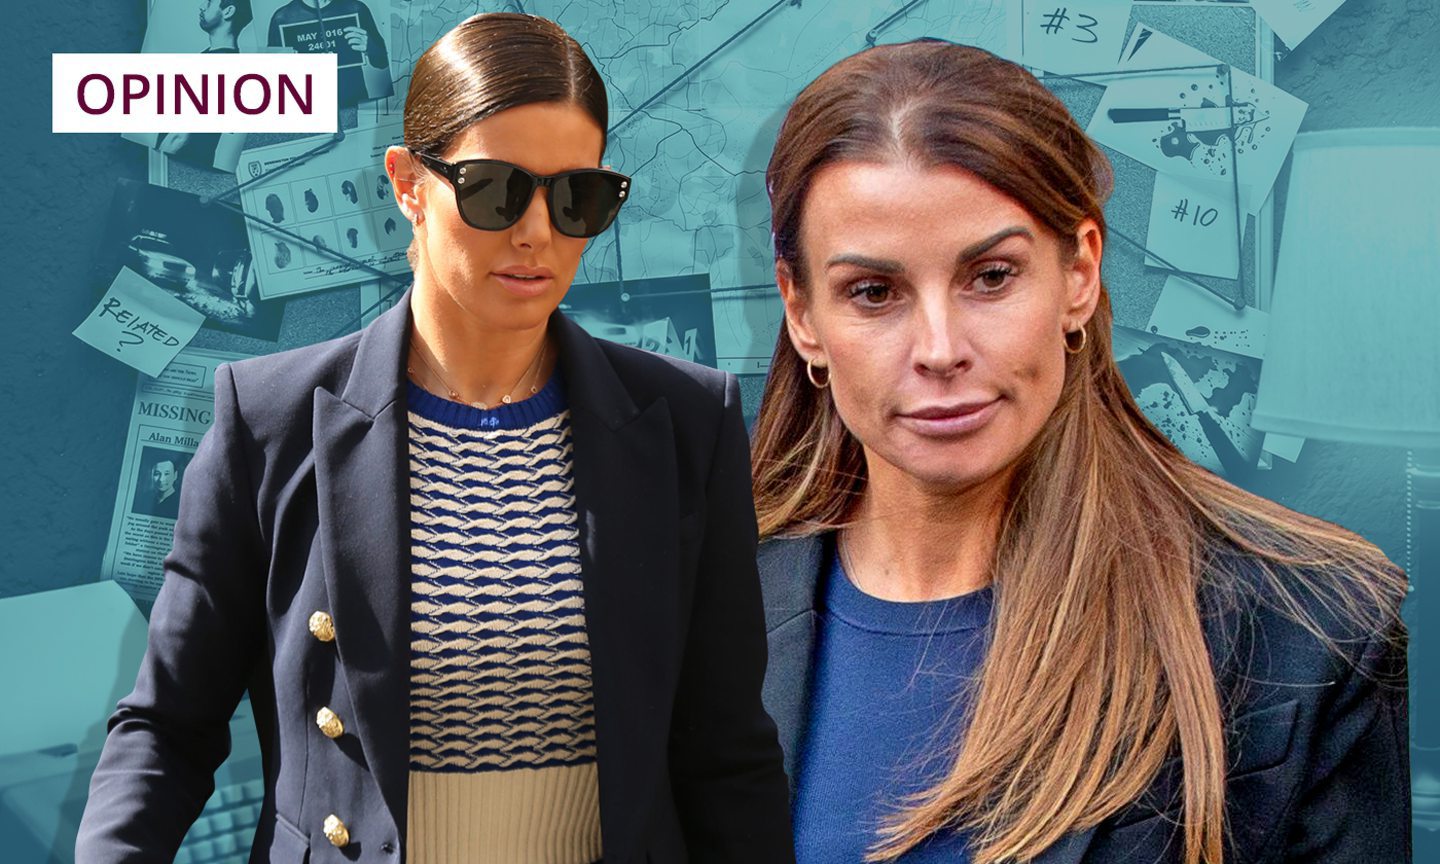 Rebekah Vardy and Coleen Rooney are facing off in the Wagatha Christie libel trial.